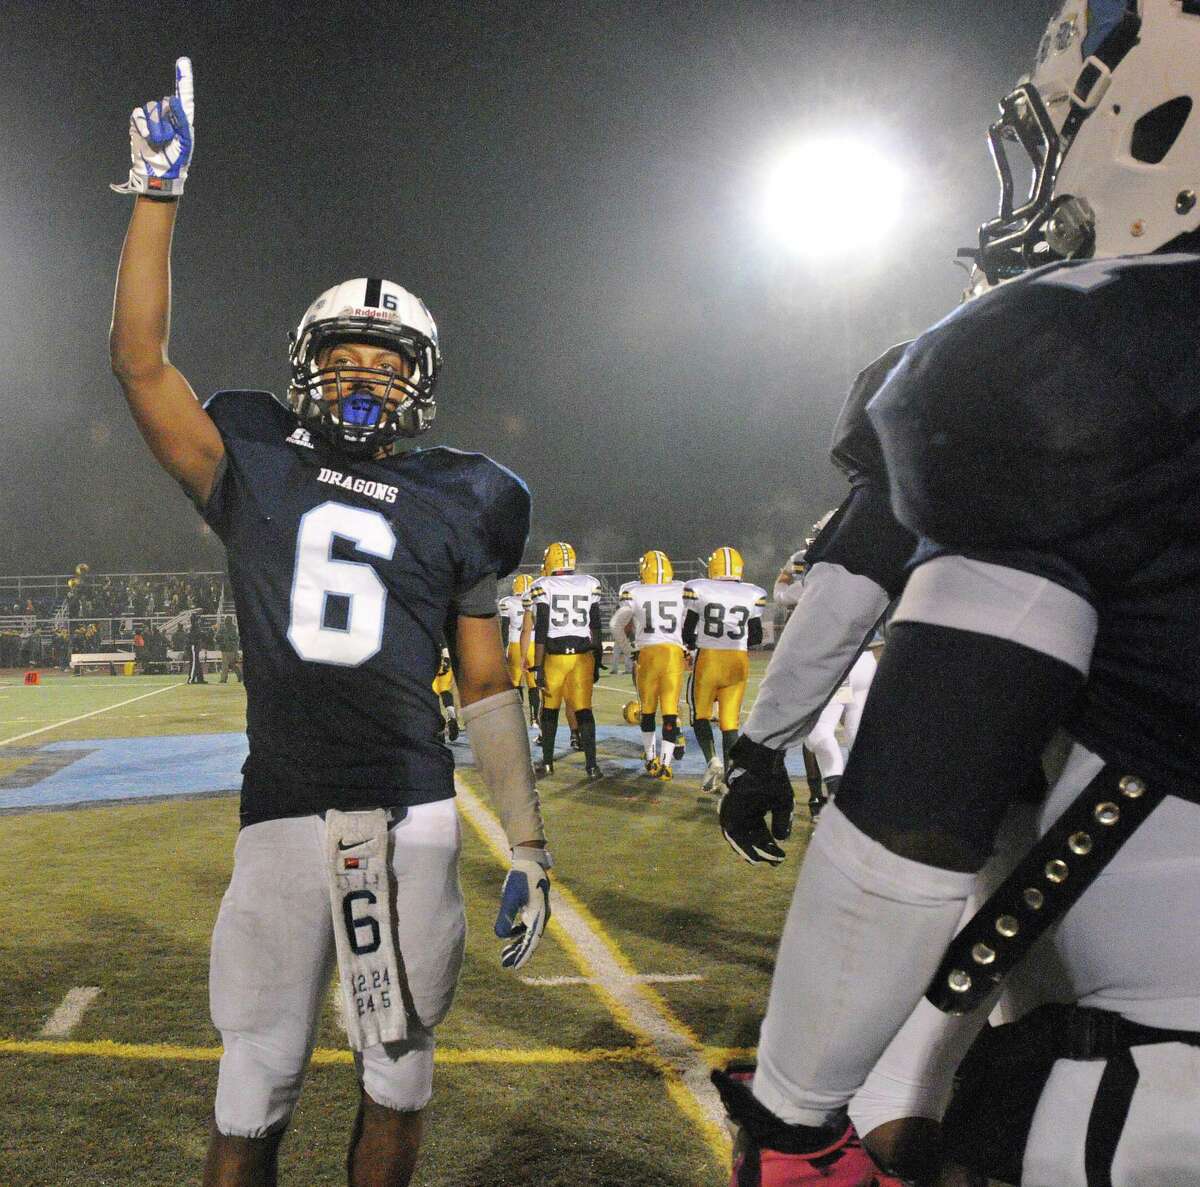 Middletown junior quarterback Dario R. Highsmith, Jr. acknowledges his teammates and fans following their 49-14 win over New London in the CIAC Class L quarterfinal game at Rosek-Skubel Stadium at MHS. Catherine Avalone – The Middletown Press